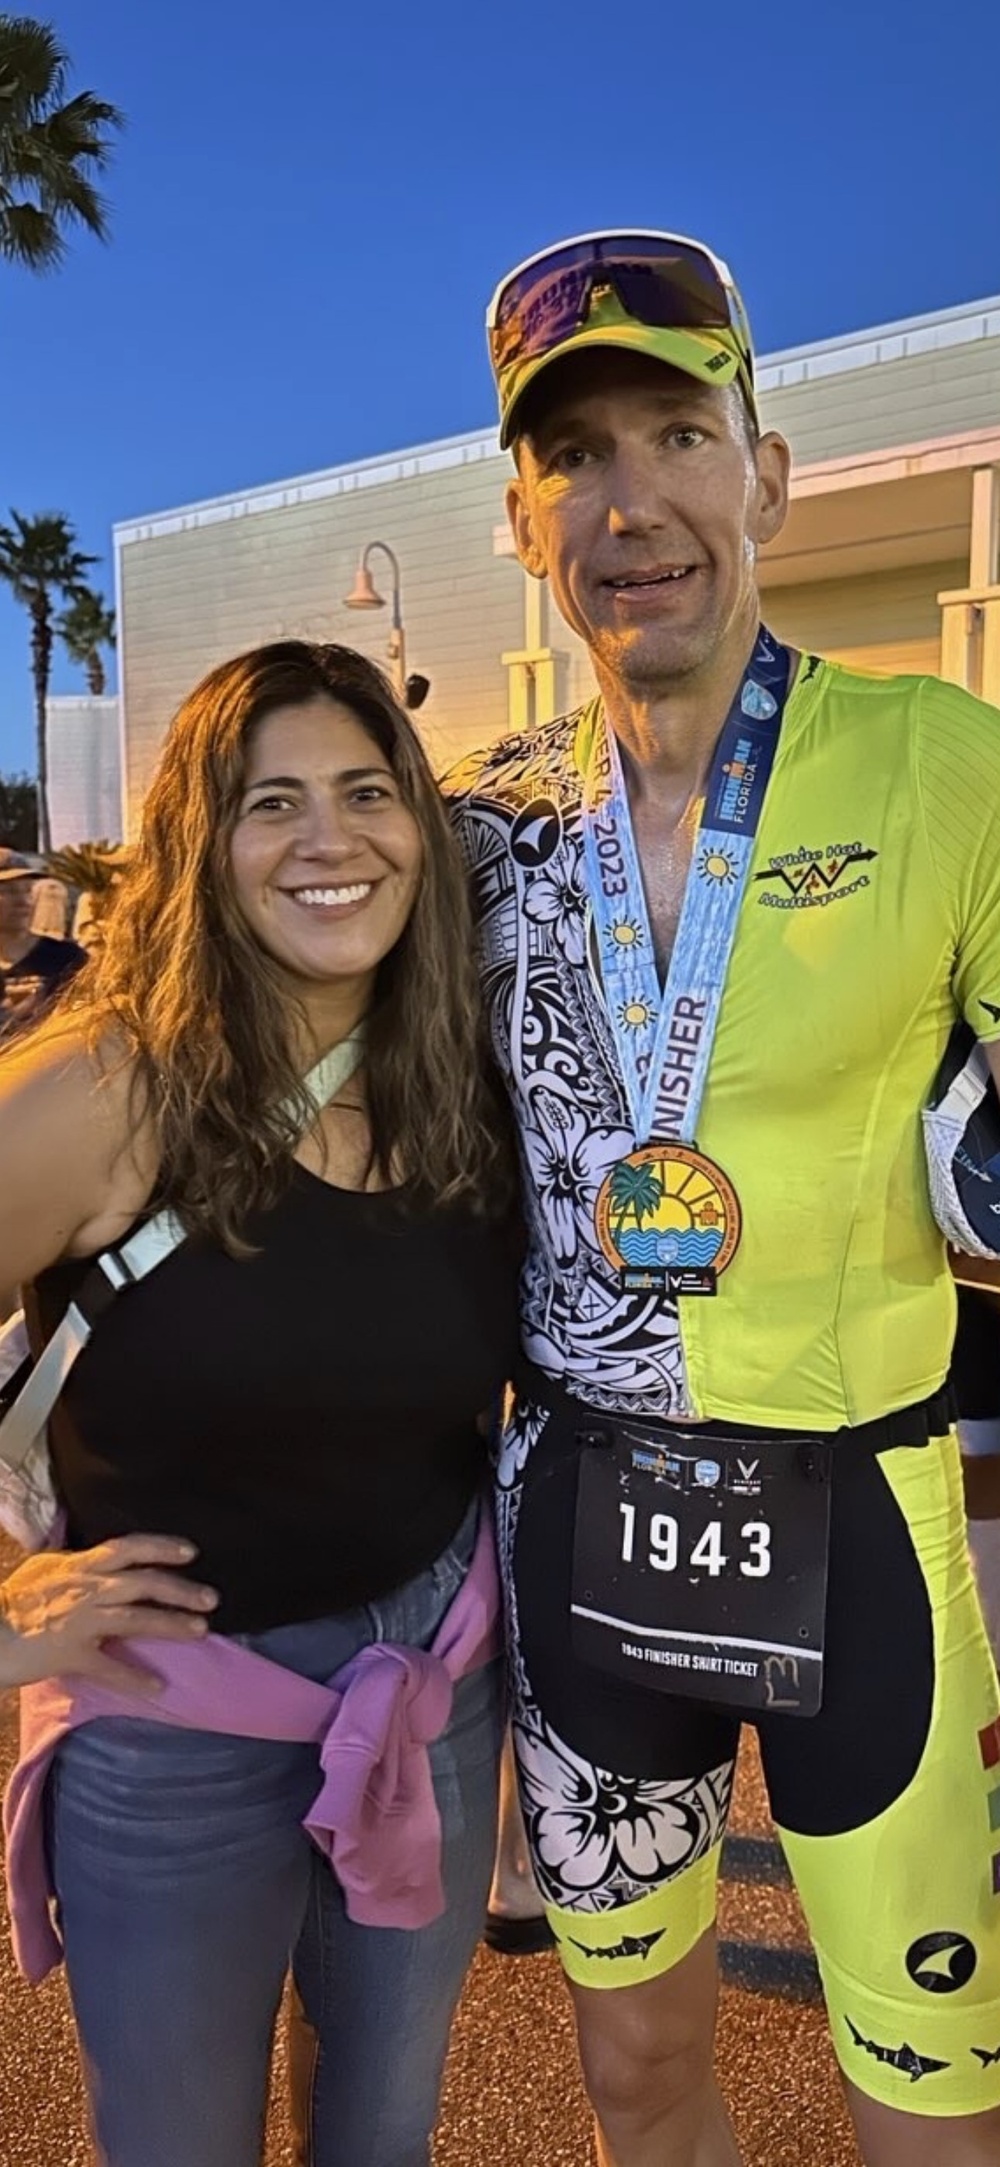 LCDR Aaron Cagley Ironman Florida finisher